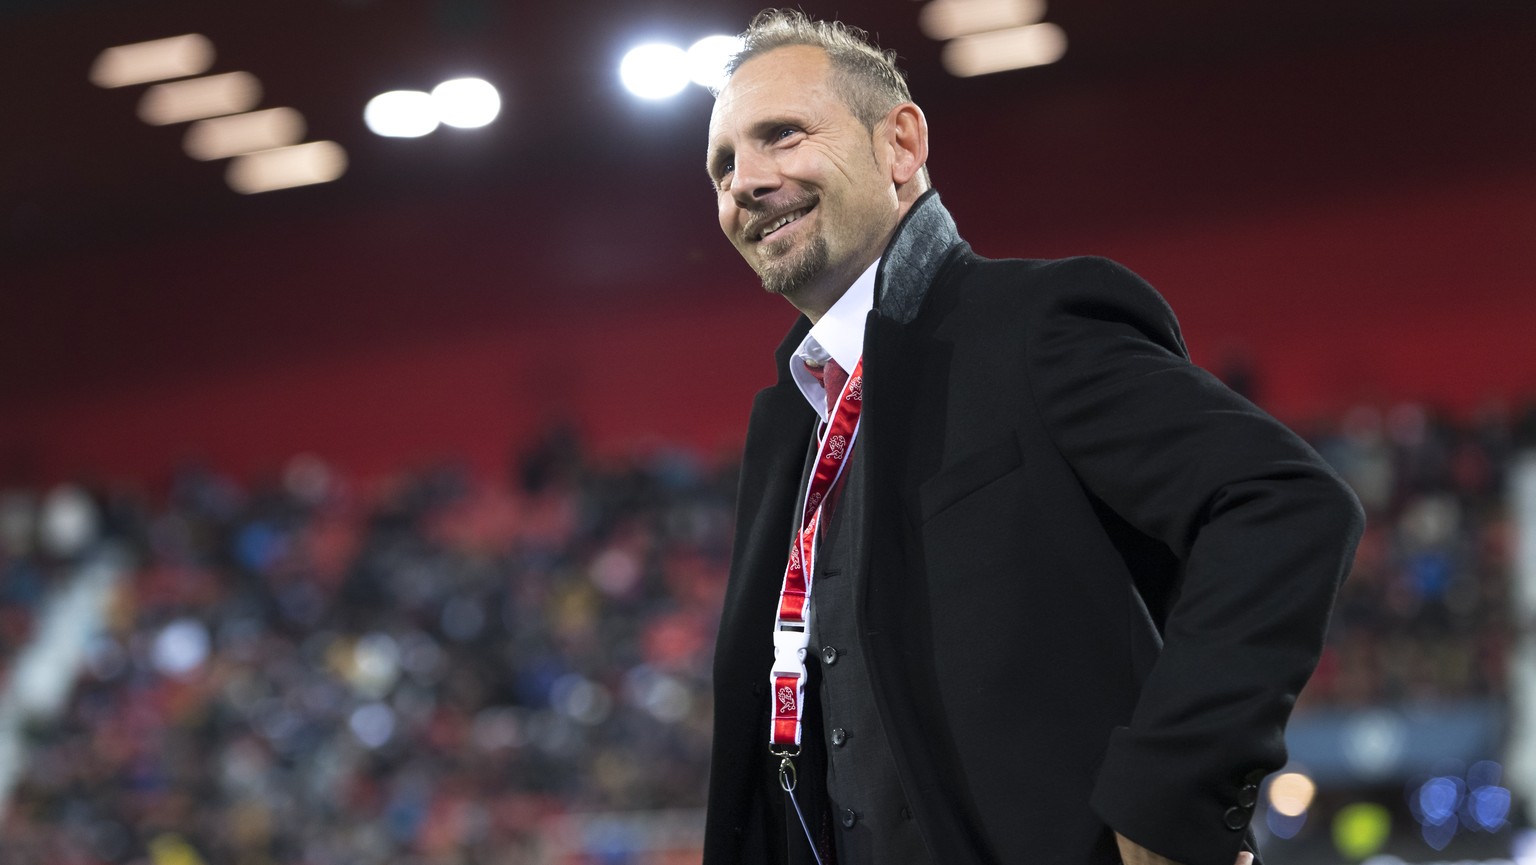 Switzerland&#039;s head coach Mauro Lustrinelli smiles before a qualification soccer match for the European Under 21 Championship between Switzerland and France at the Stadium Stade de la Maladiere, i ...